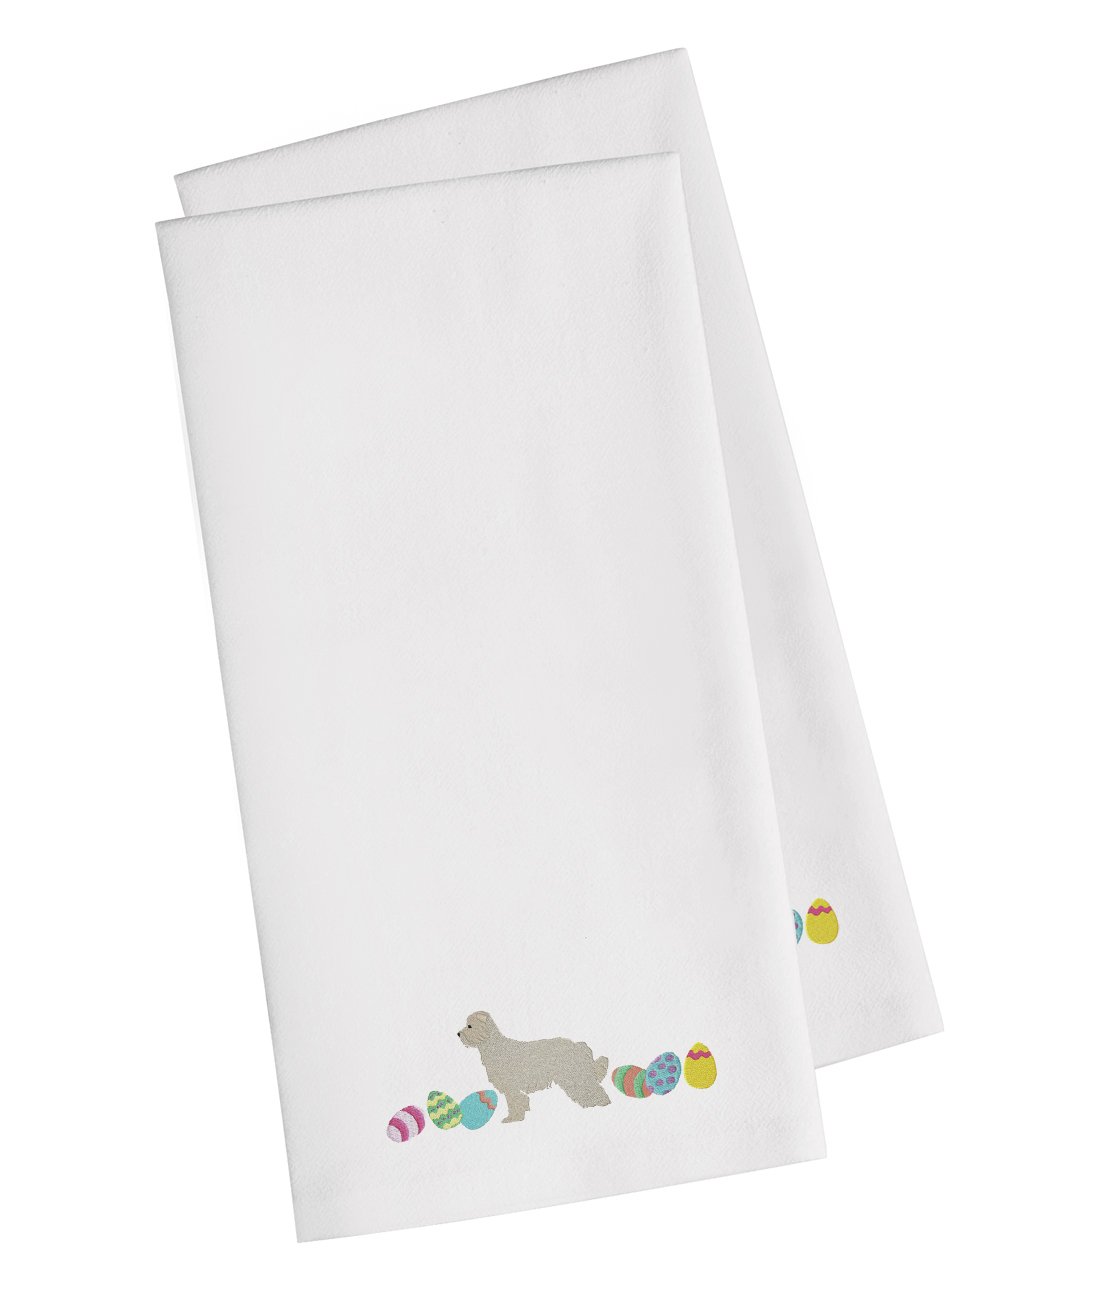 Great Pyrenees Easter White Embroidered Kitchen Towel Set of 2 CK1650WHTWE by Caroline's Treasures